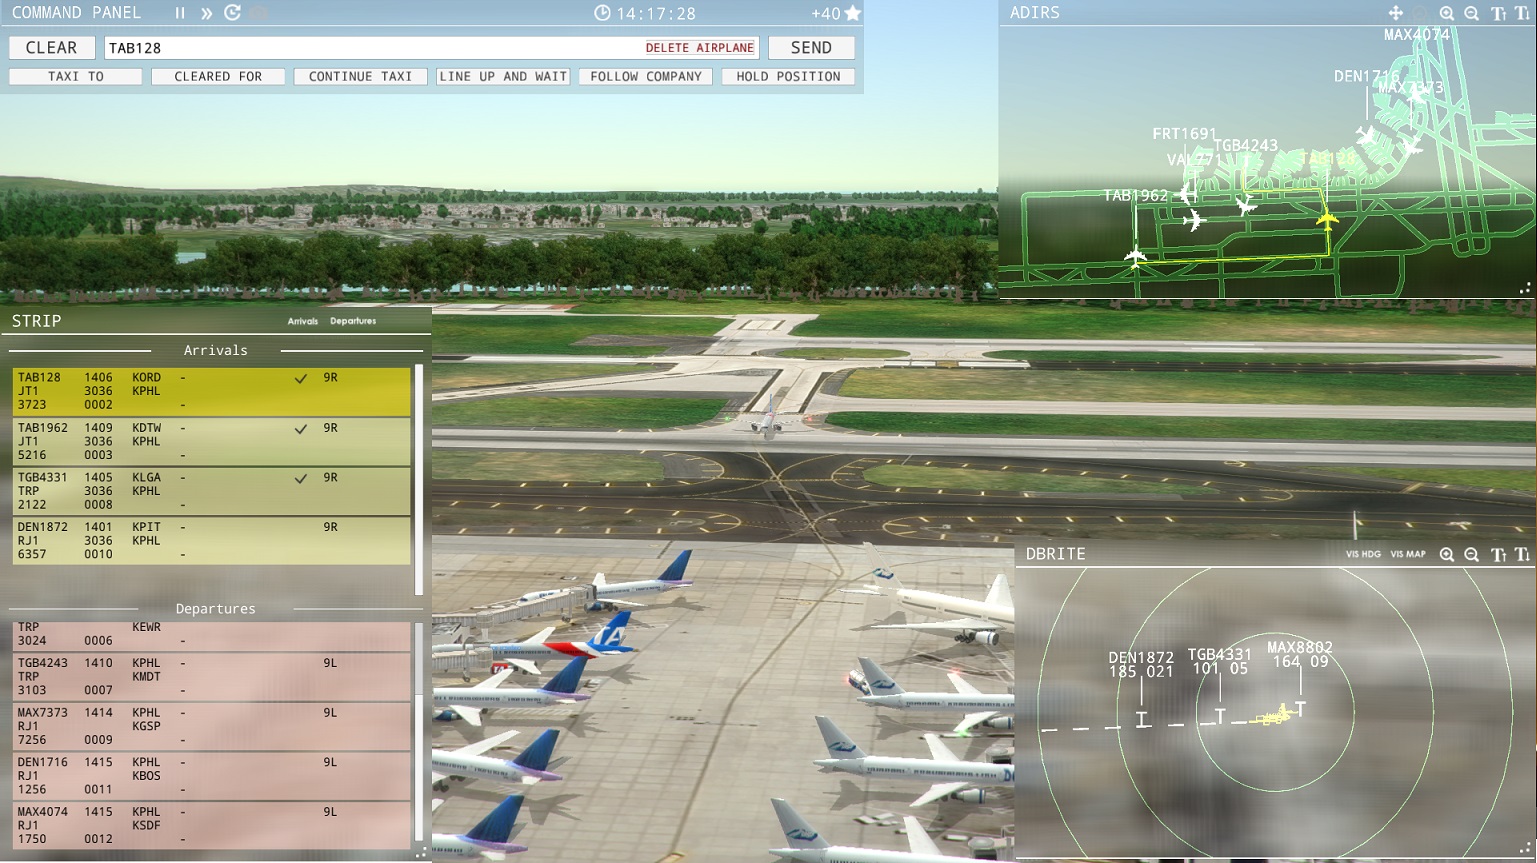 Tower!3D: Planes crossing runways without clearance - ATC Simulators ...